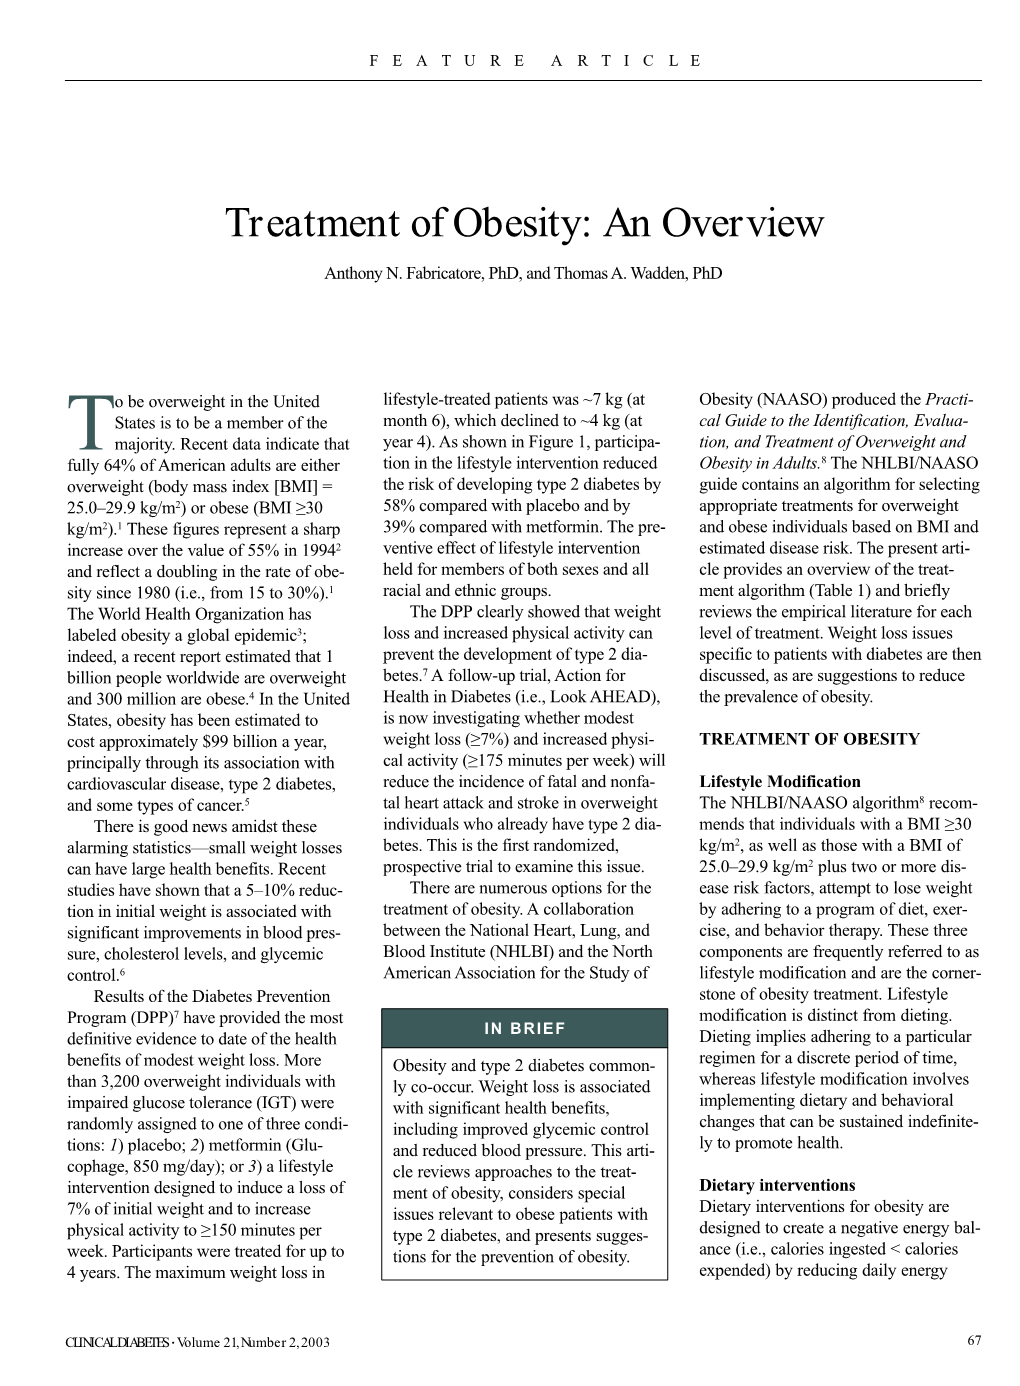 Treatment of Obesity: an Overview